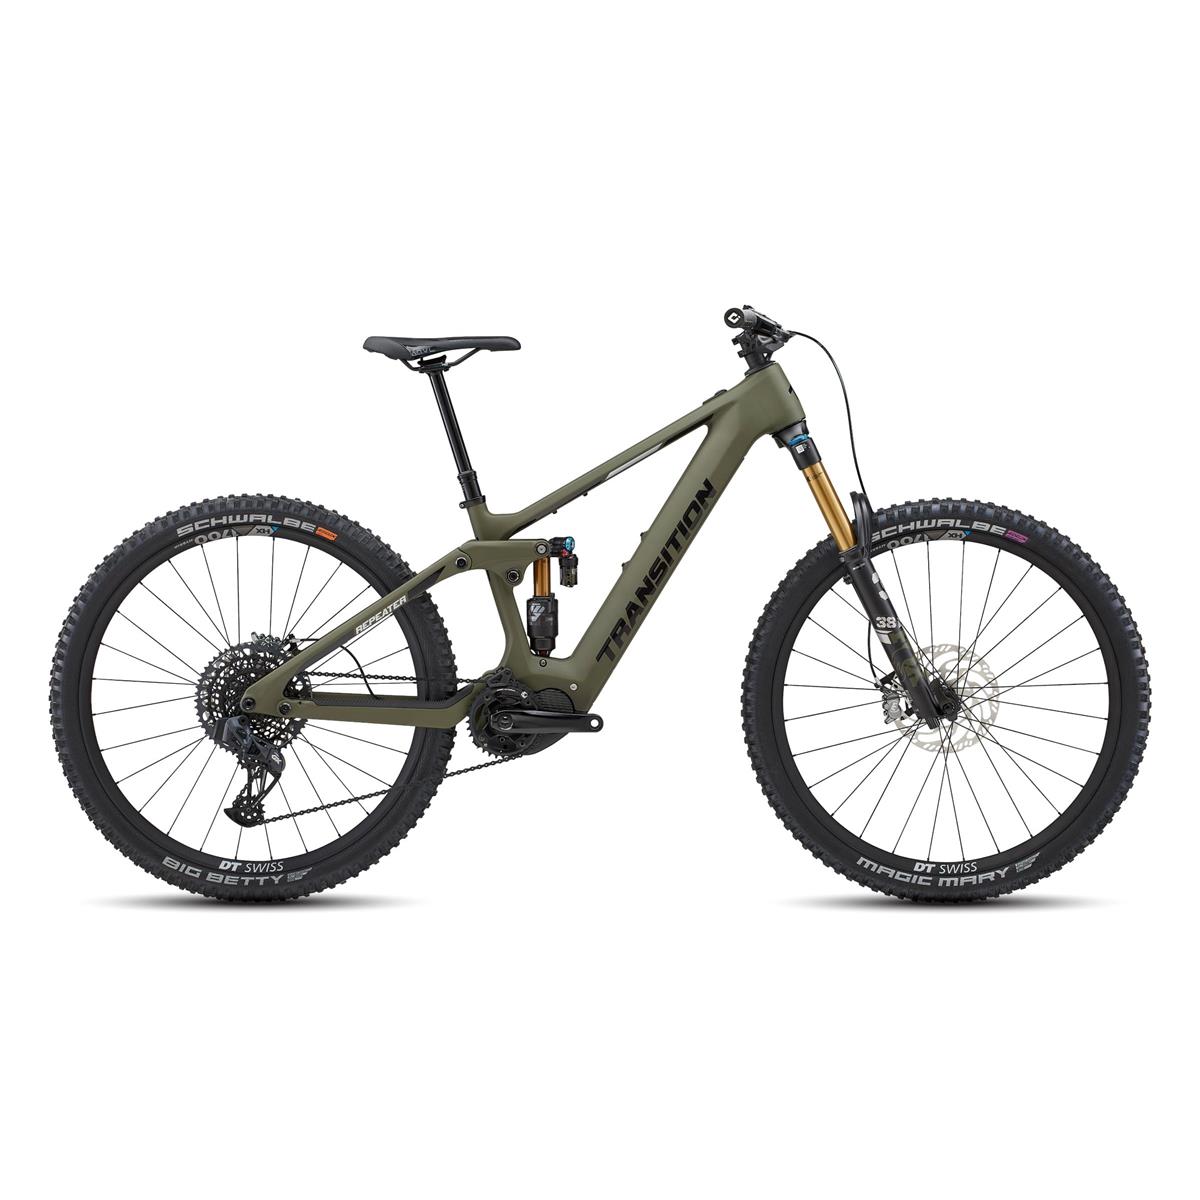 Repeater Carbon AXS 29'' 160mm 12s 630Wh Shimano EP8 Mossy Green 2022 Size S